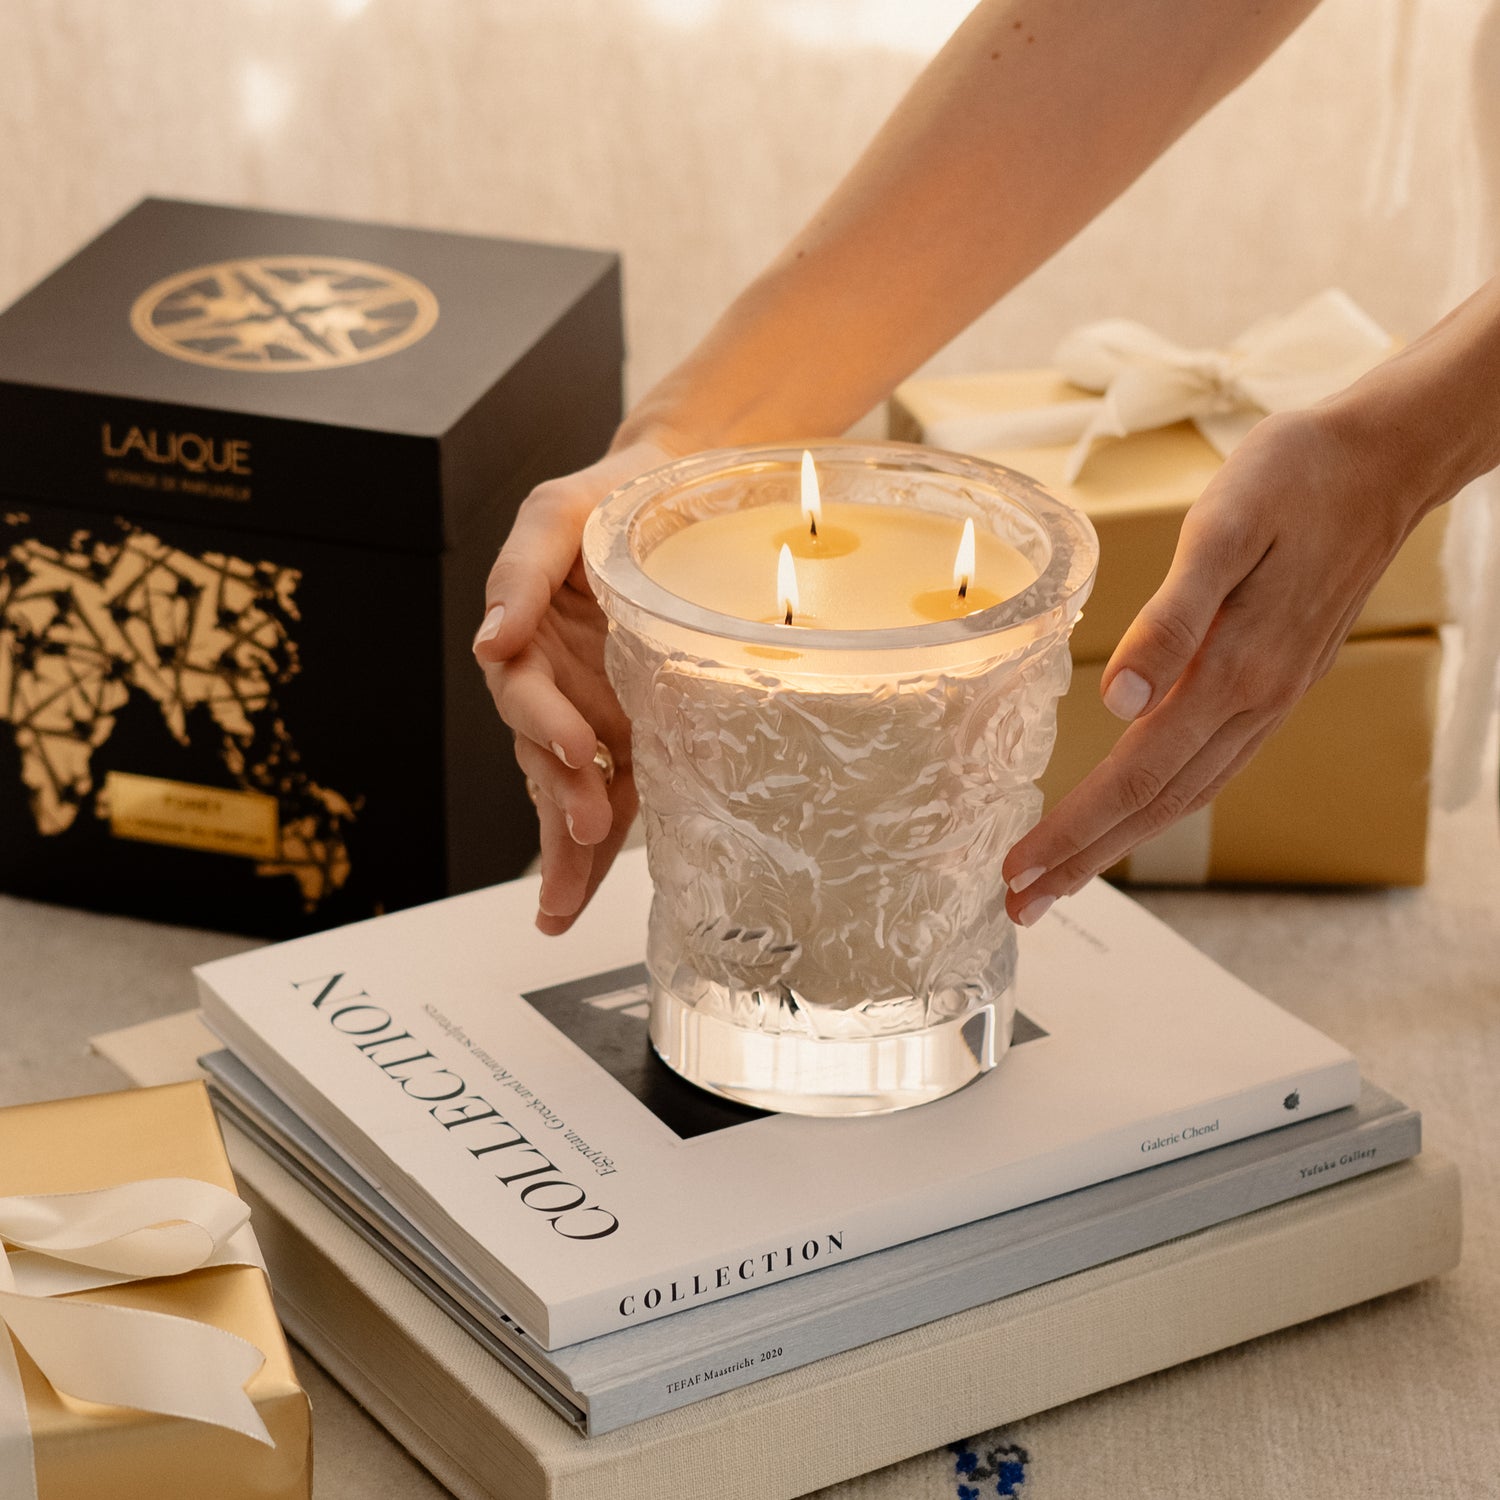 600G CANDLES BY LALIQUE HOME FRAGRANCES